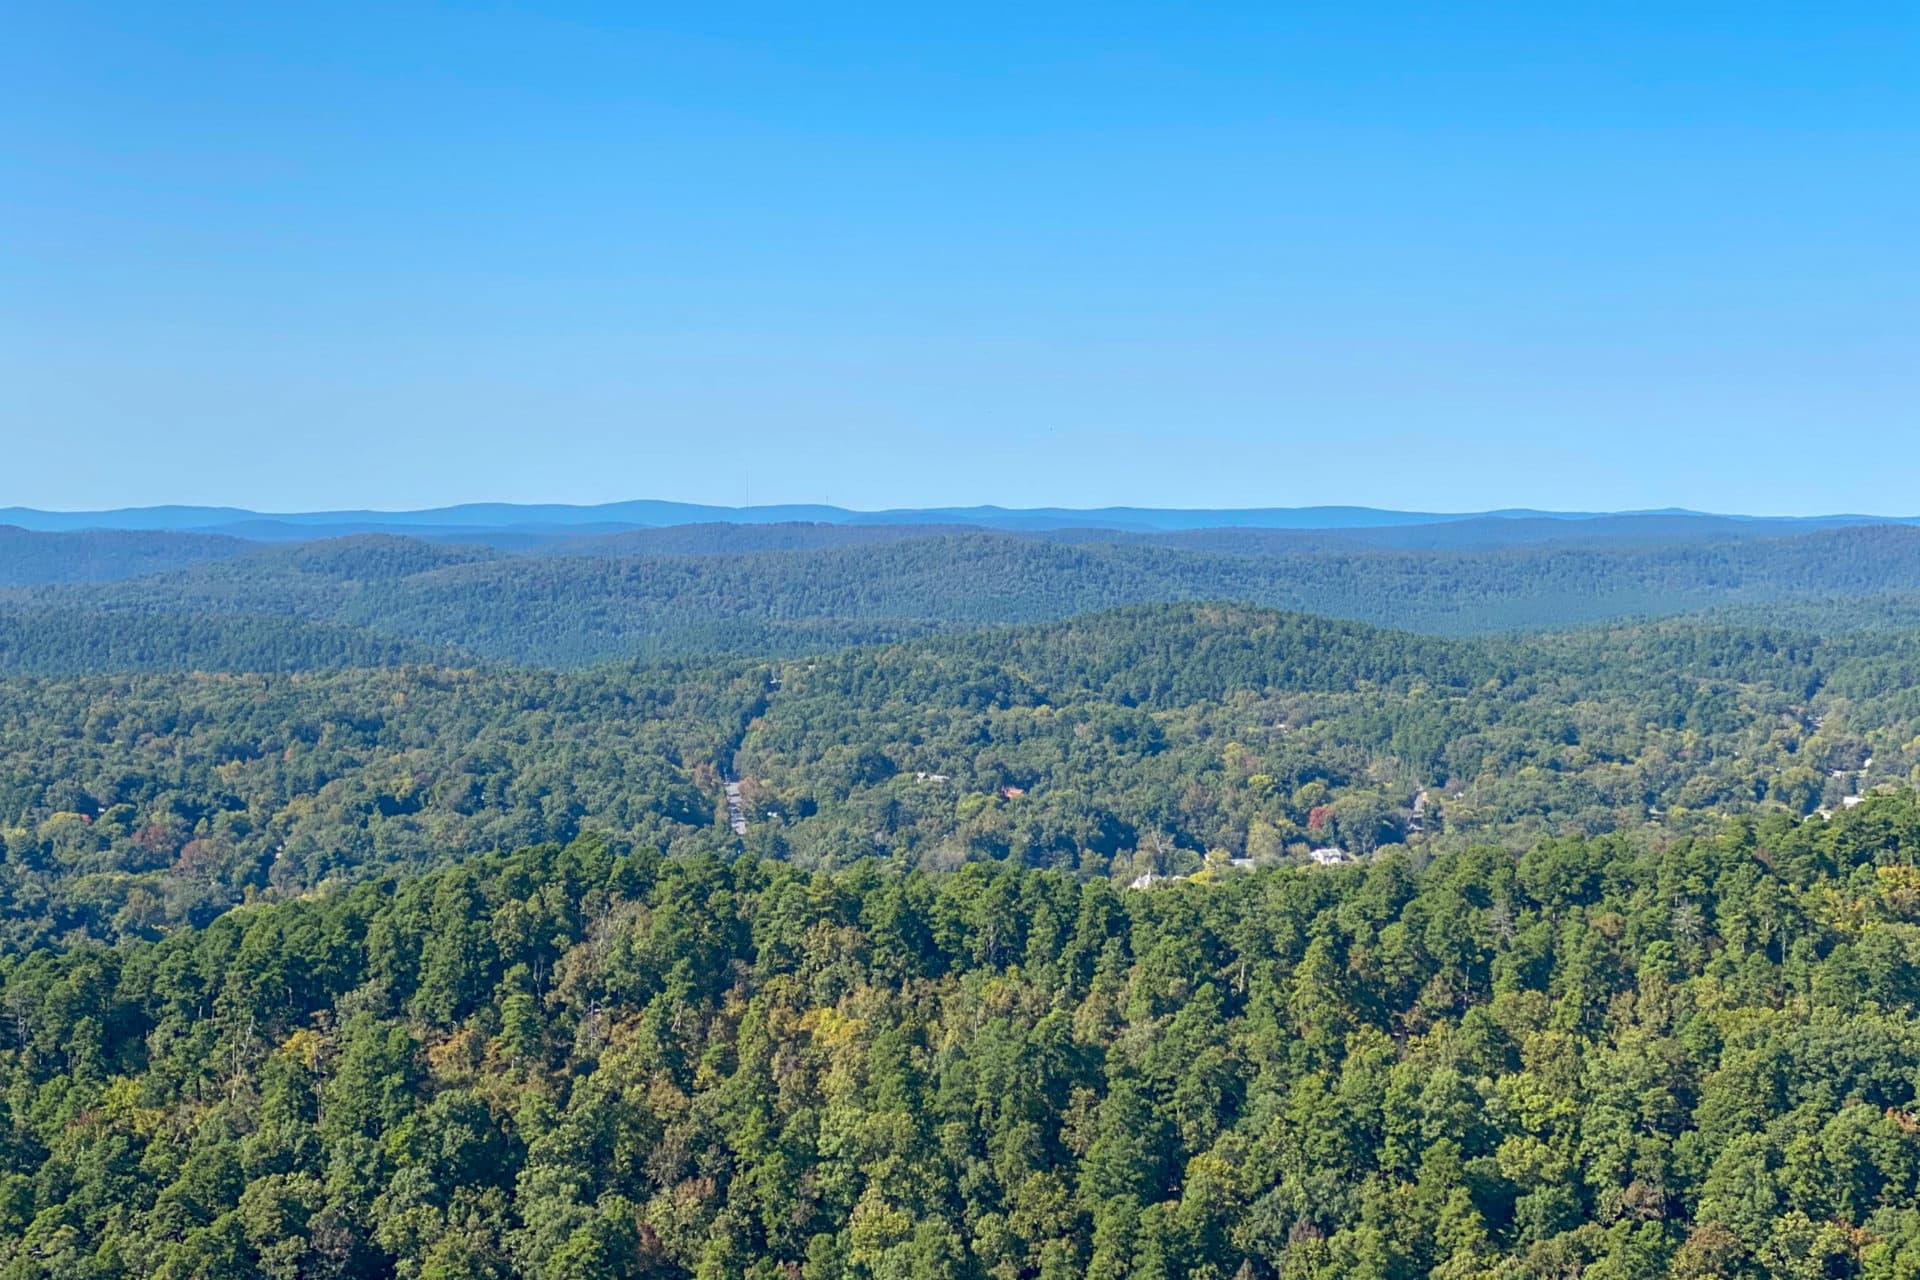 The view from the Hot Springs Tower gives visitors a 360-degree panoramic view of the park.